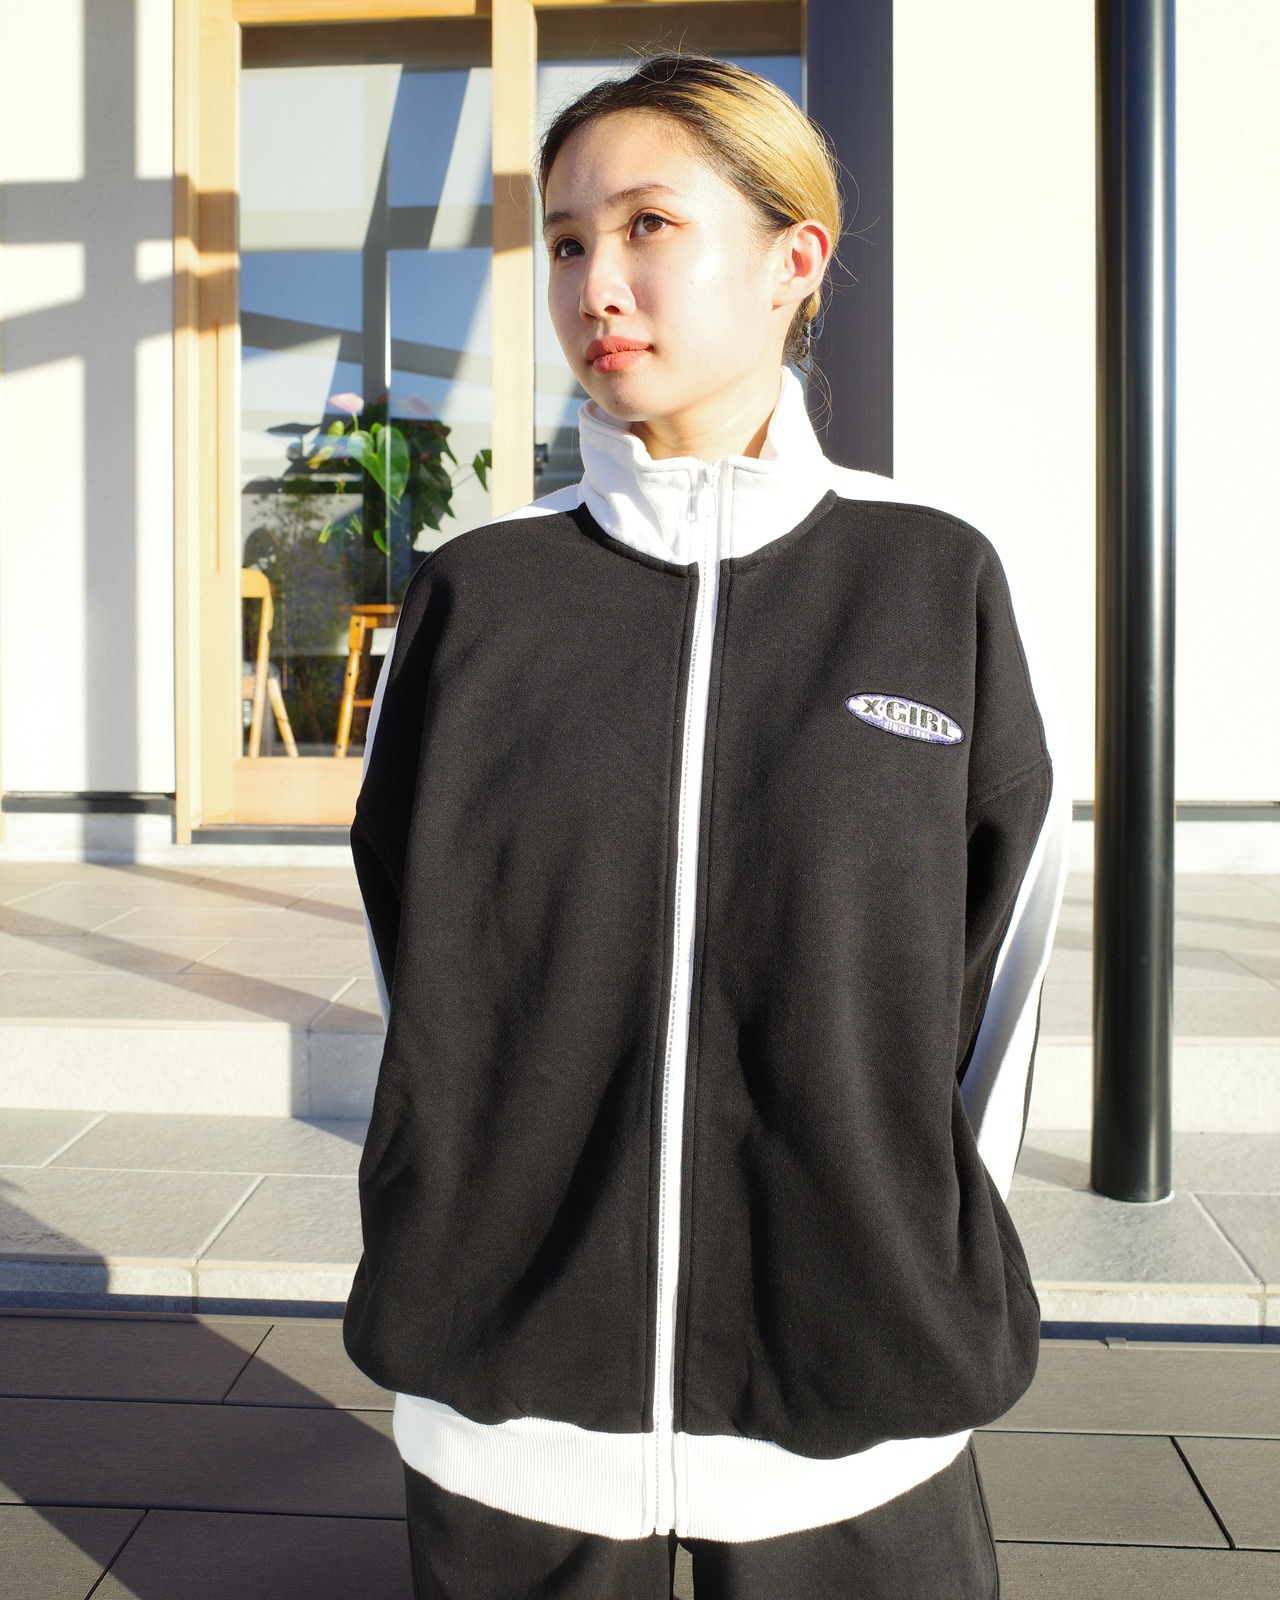 【X-girl】CONTRAST STRIPE ZIP UP SWEAT 【エックスガール】